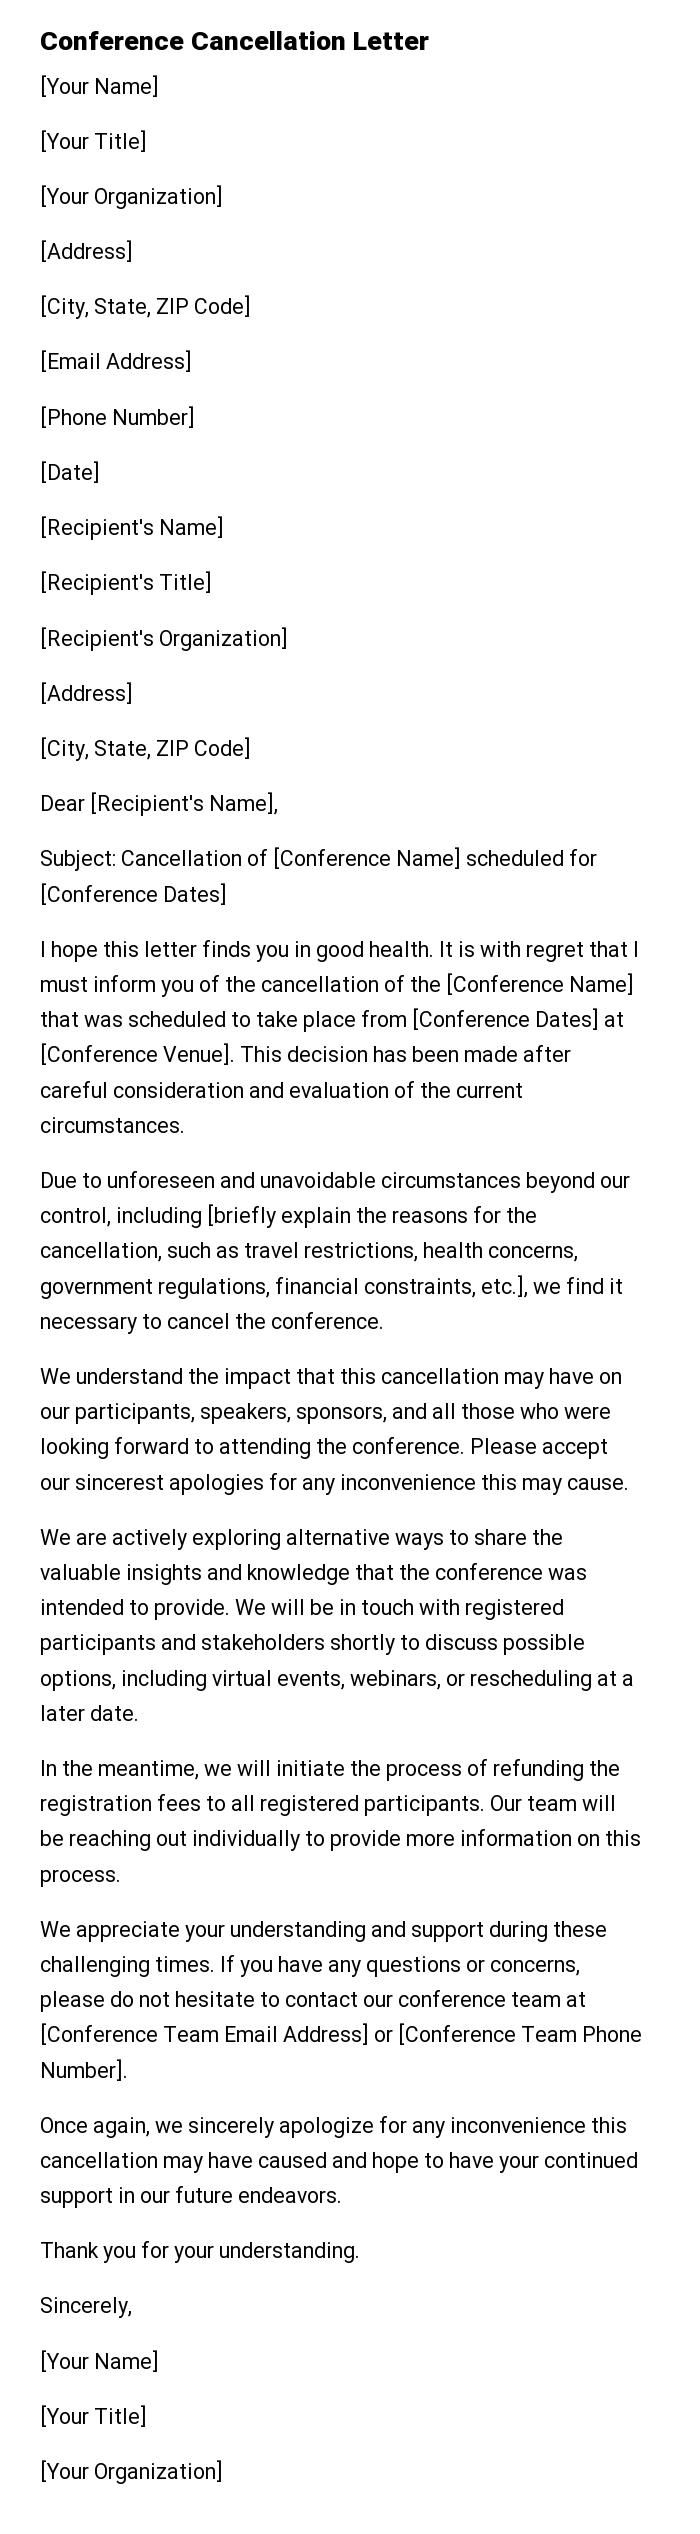 Conference Cancellation Letter